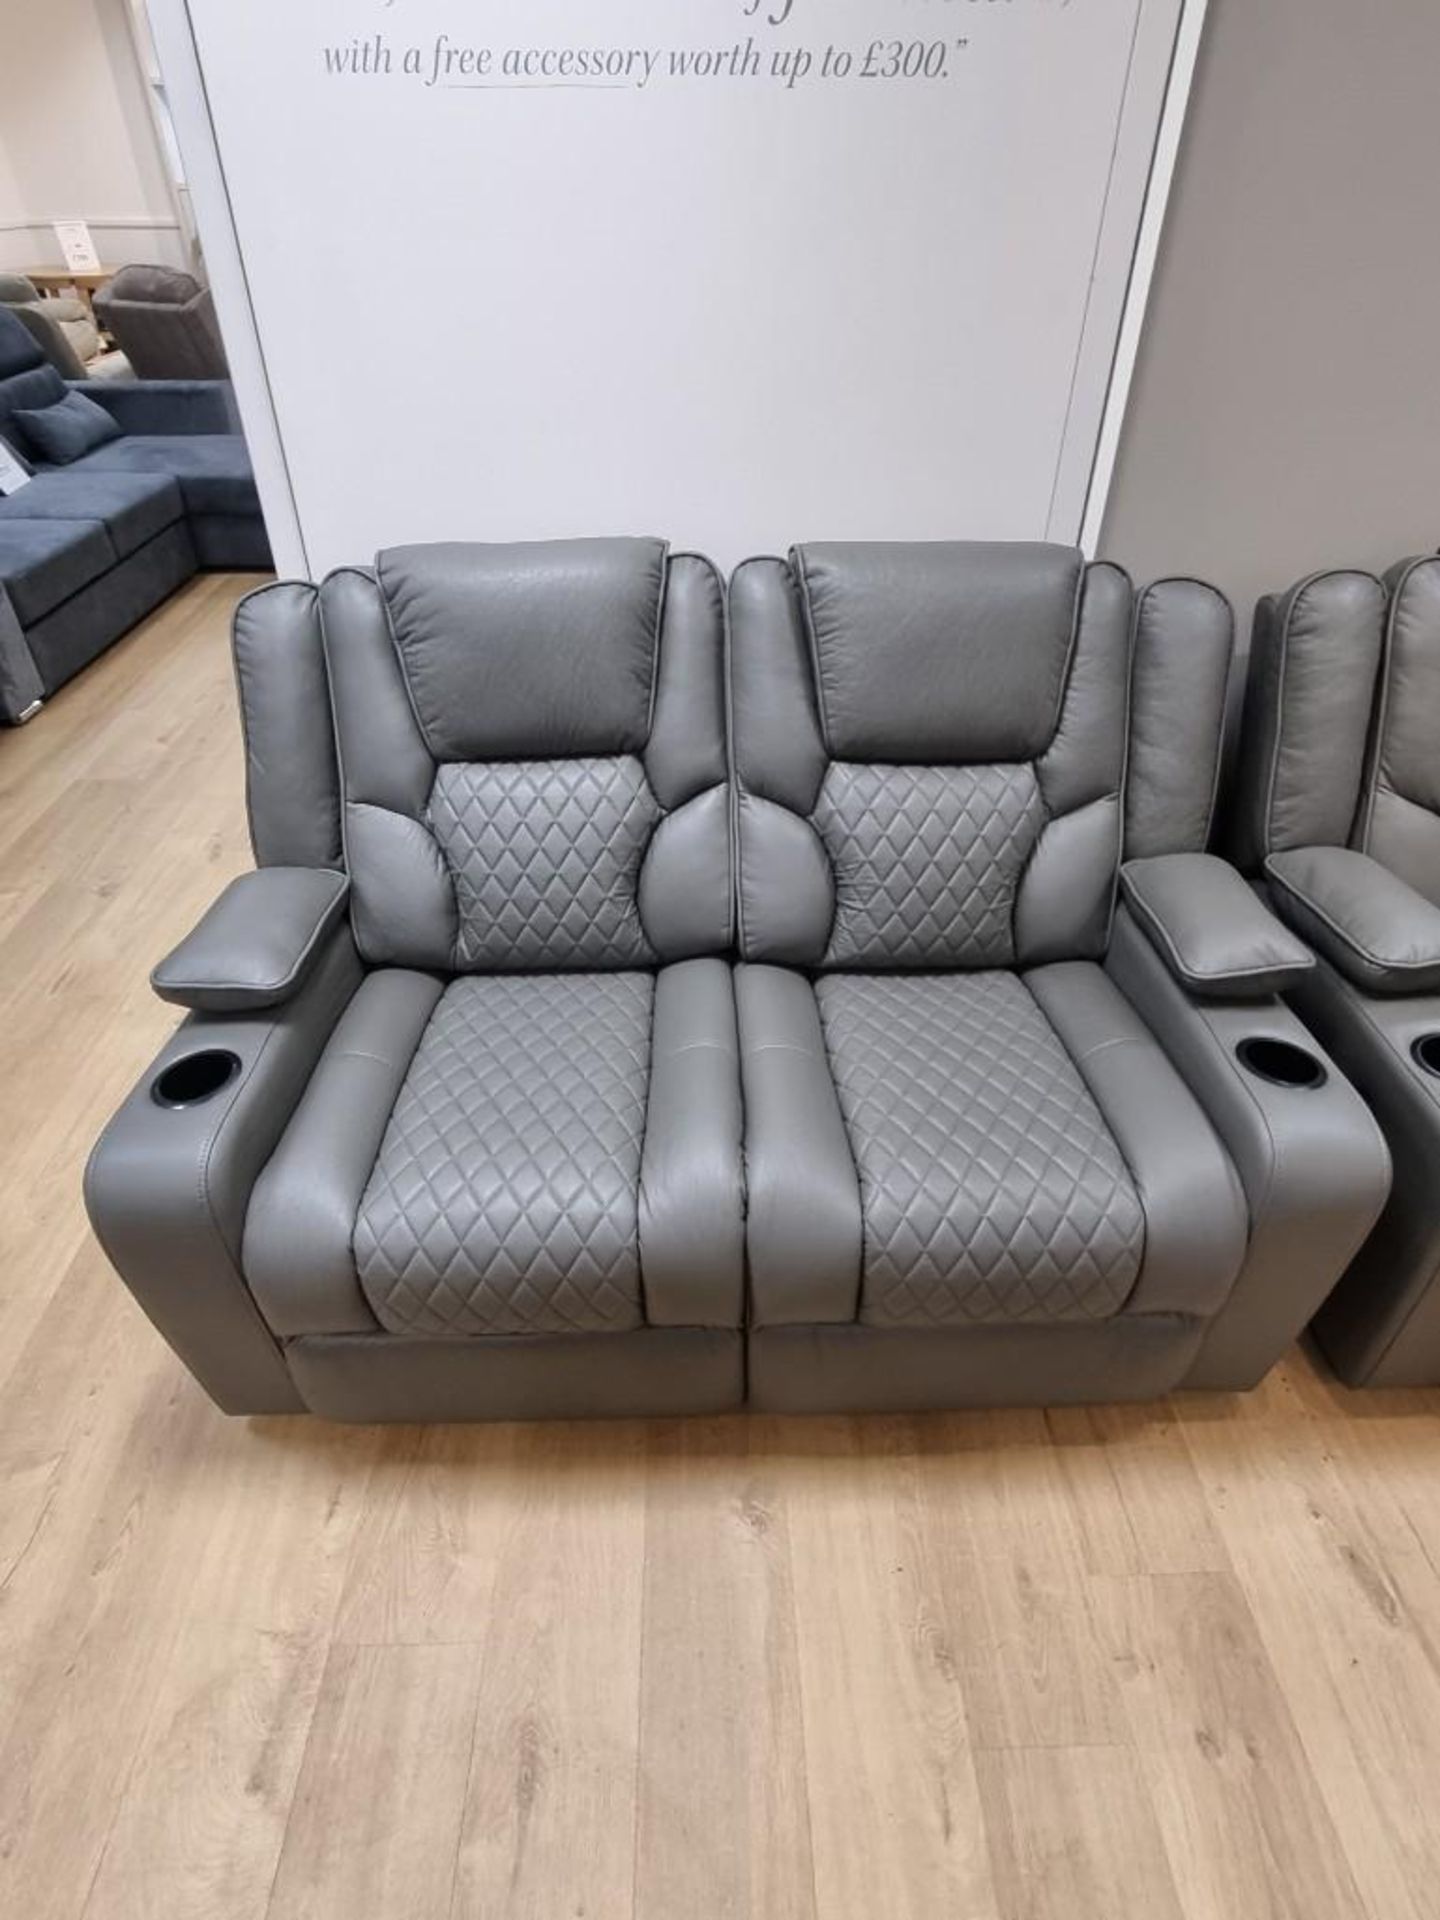 BRAND NEW Grey Leather 2 Seater Electric Recliner With USB Charging Port and Floor lights. - Image 3 of 6